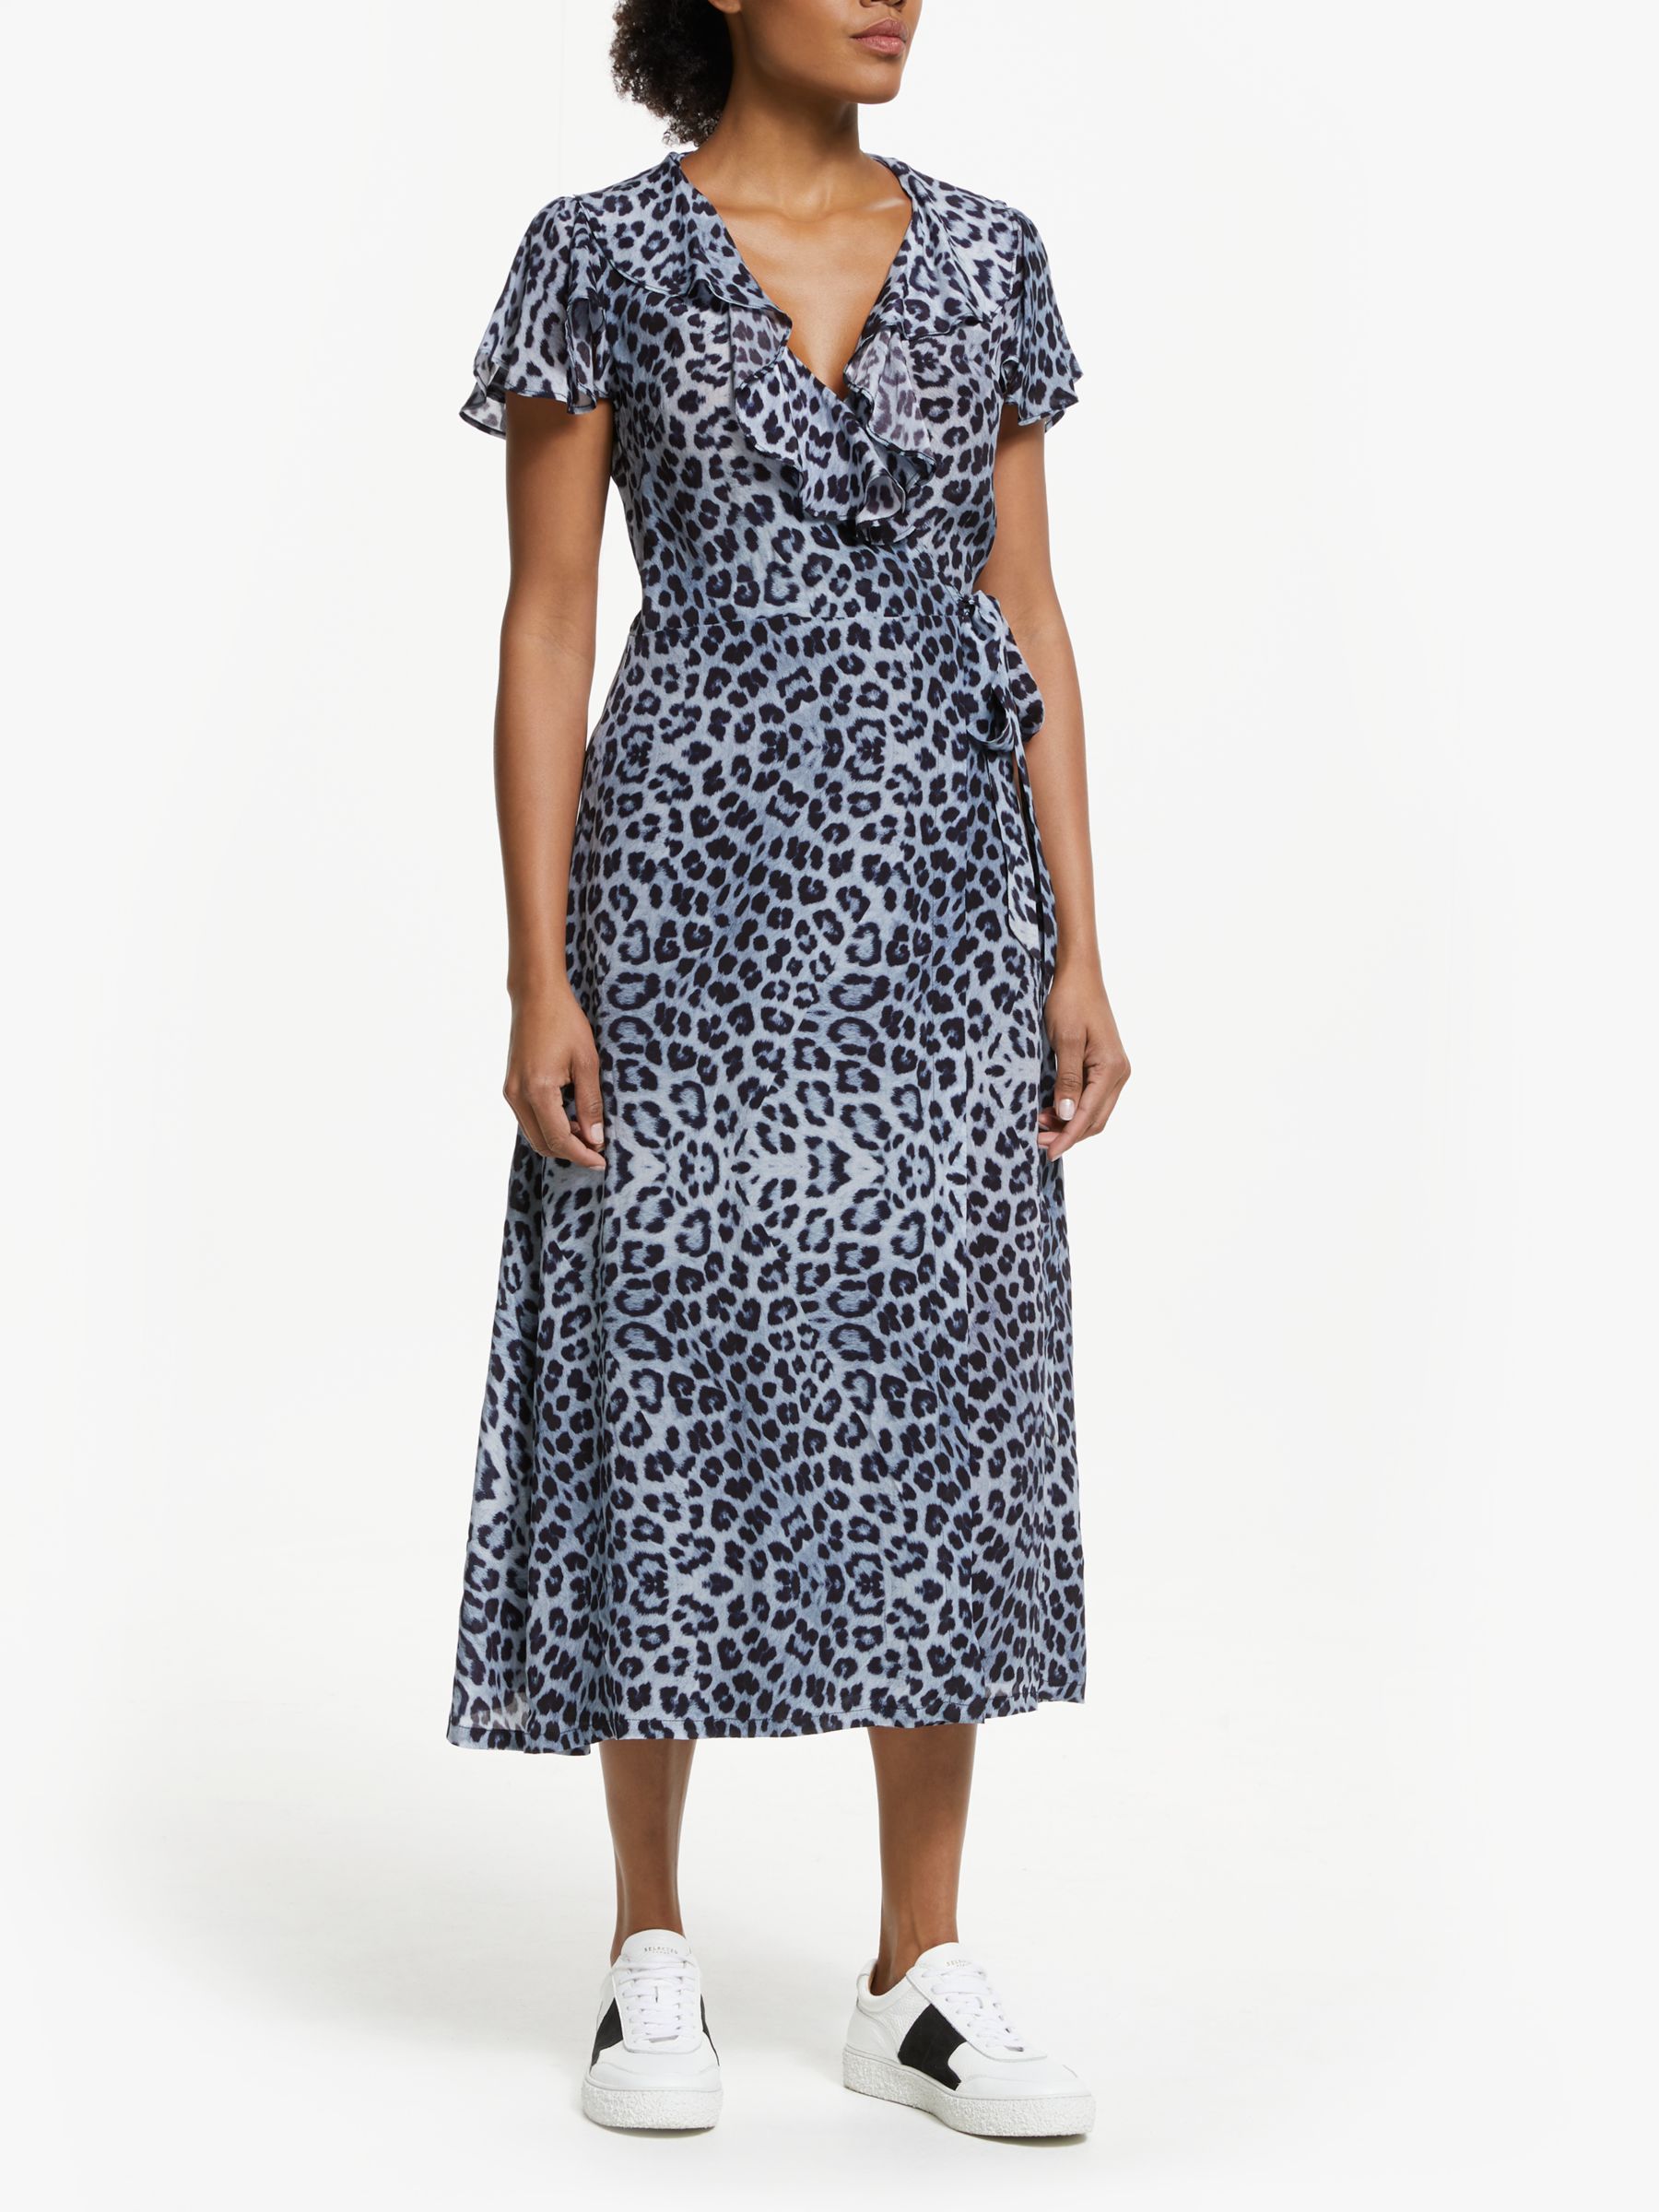 lily and lionel leopard dress